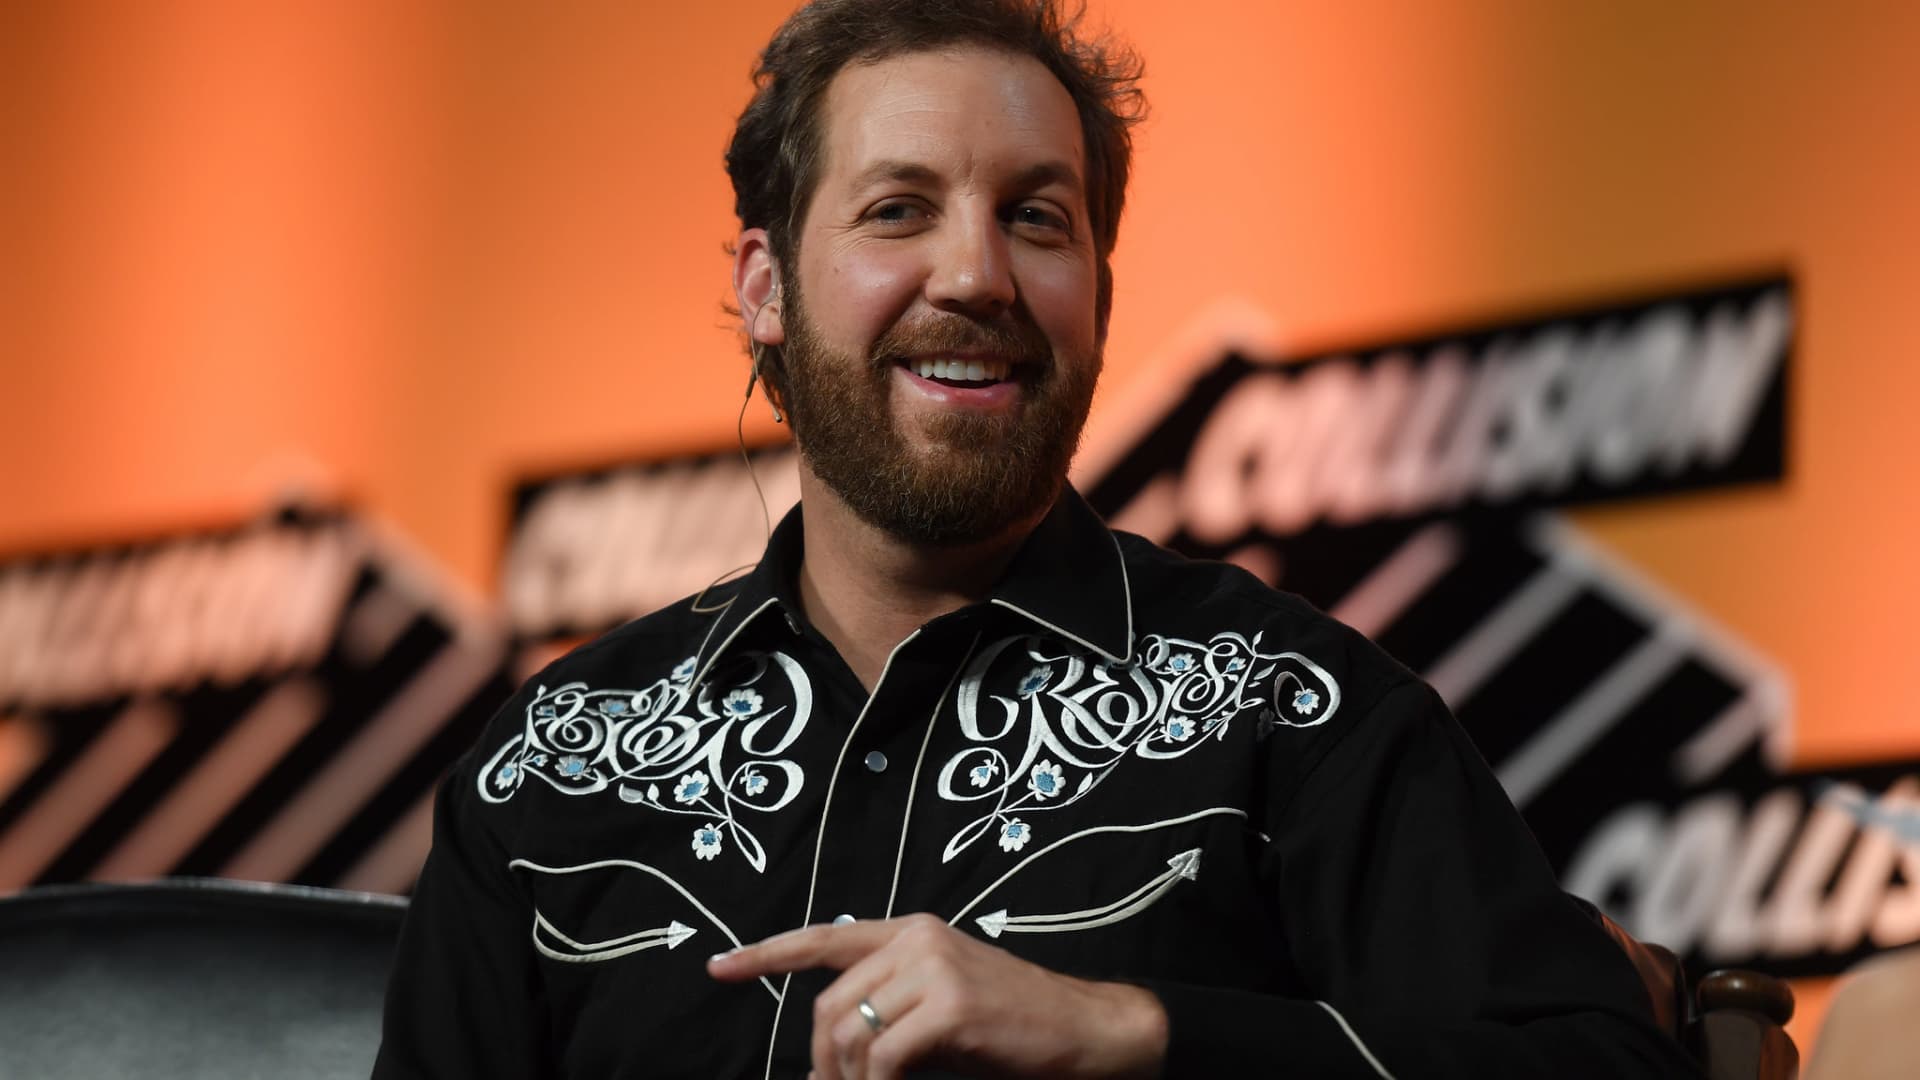 Twitter investor Chris Sacca says Elon Musk is ‘alone right now’